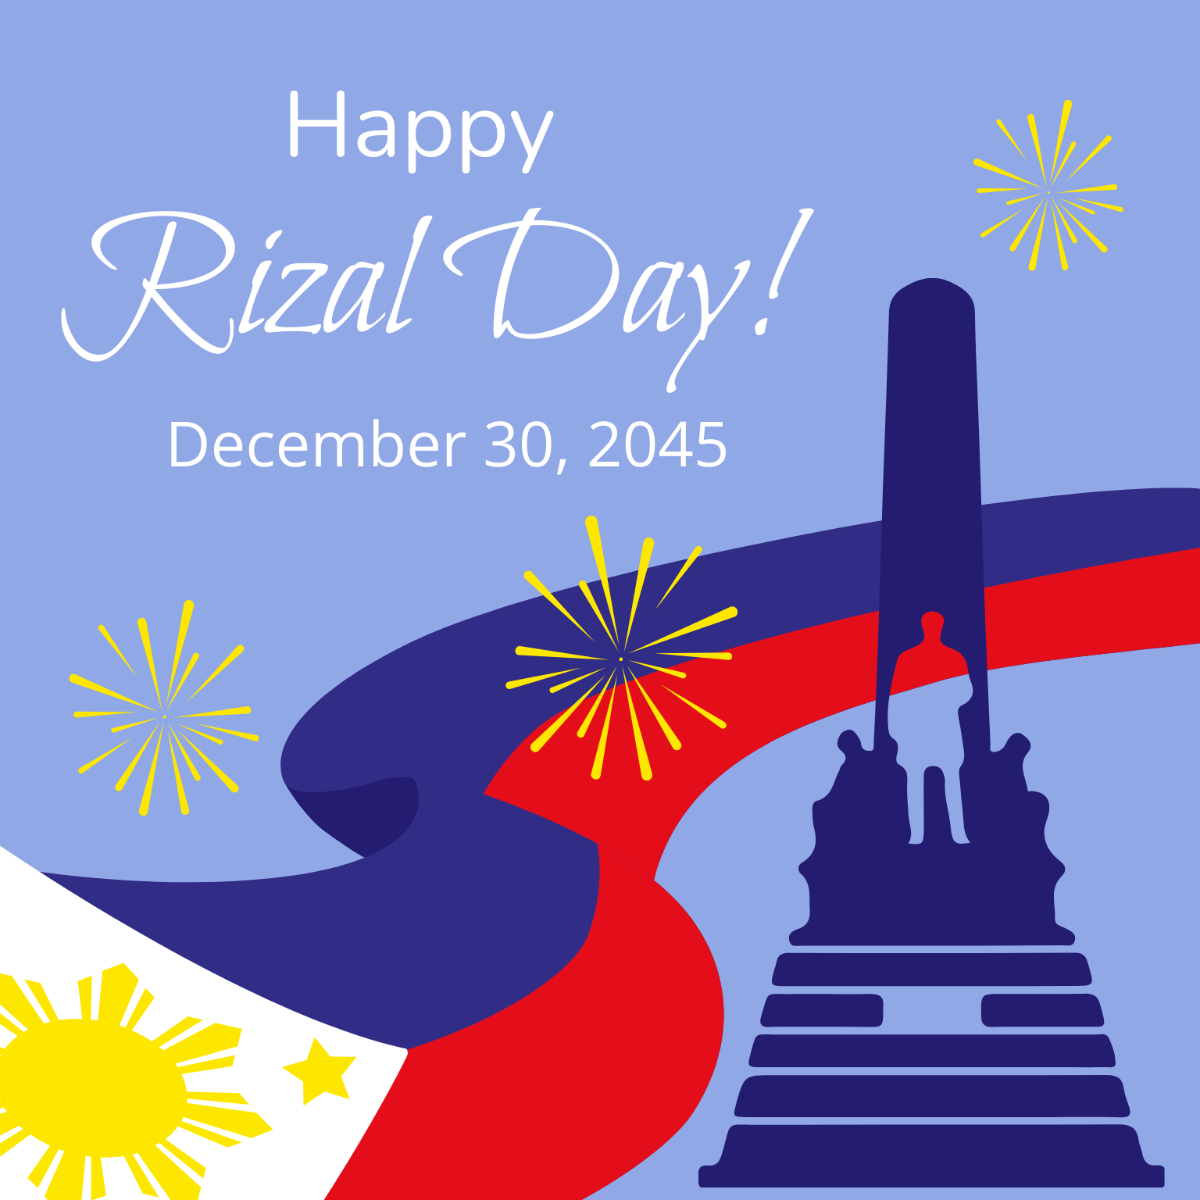 Rizal Day Wishes Vector